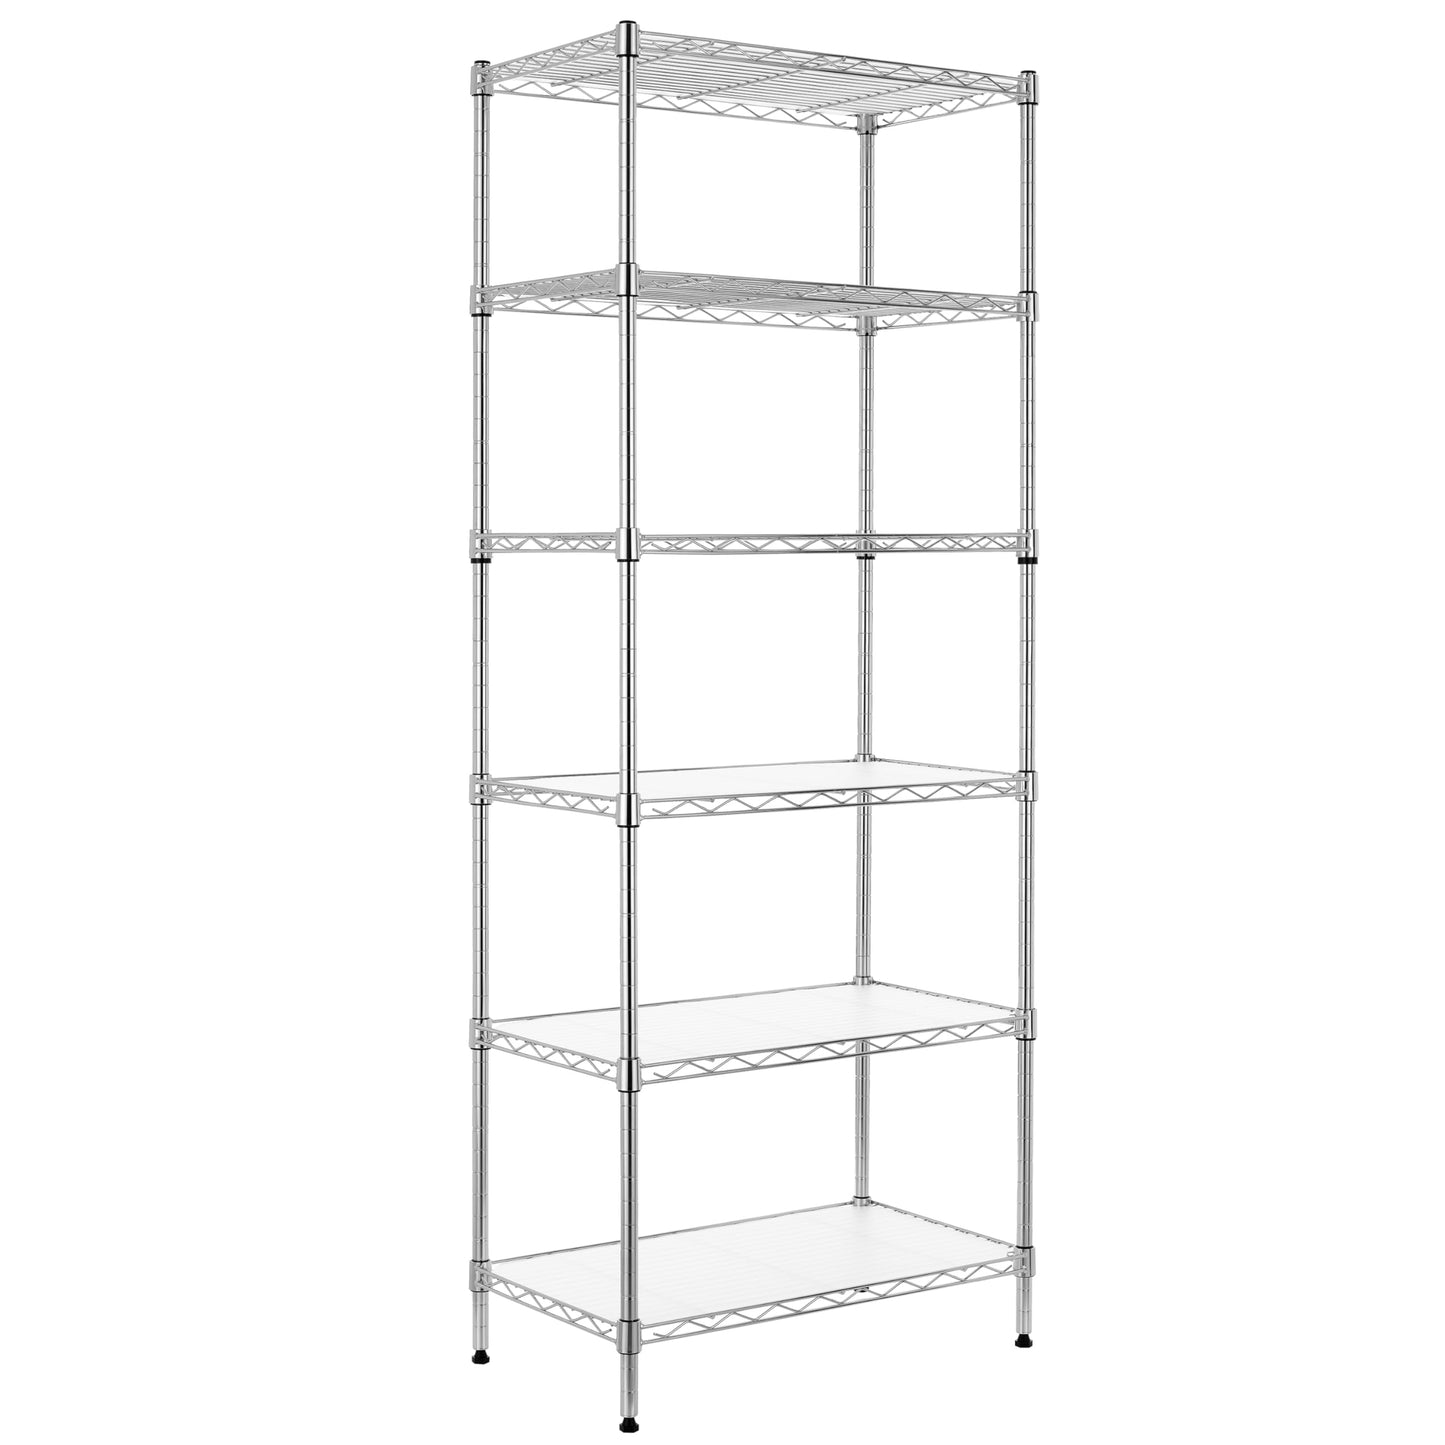 Finnhomy 6-Tier Wire Shelving Unit Adjustable Steel Wire Rack Shelving 6 Shelves Steel Storage Rack or Two 3 Tier Shelving Units with PE mat and